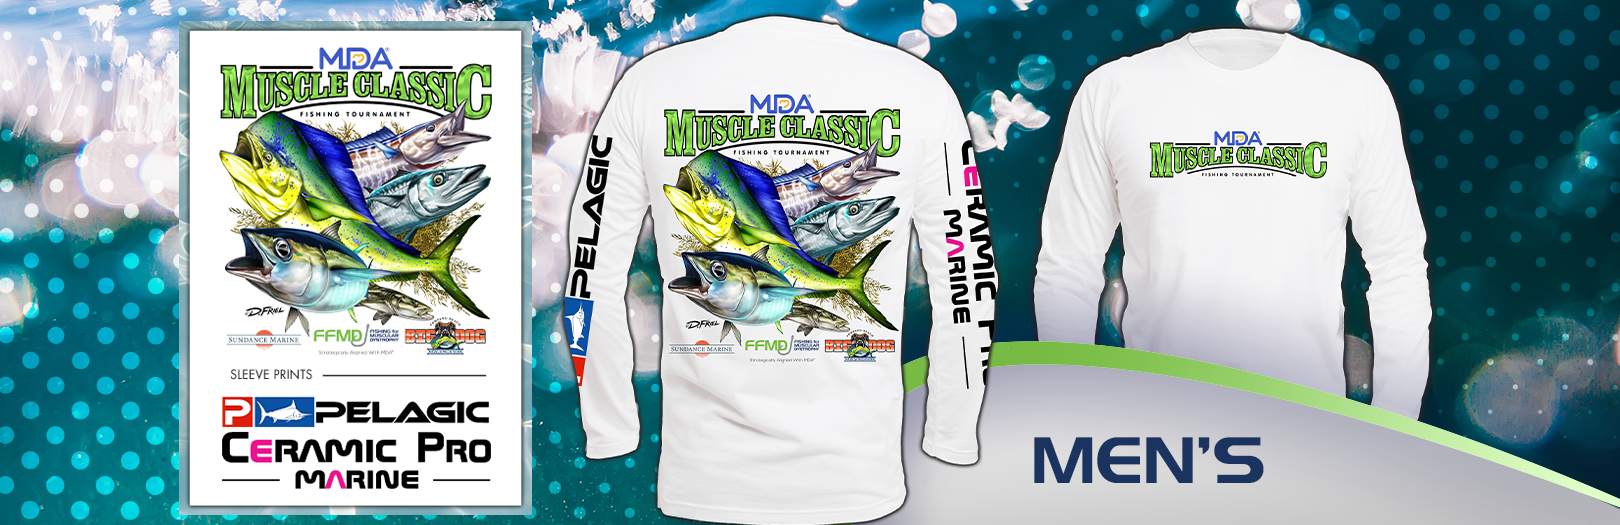 FFMD Muscle Classic Tournament Shirt – Fishing for MD - Muscular Dystrophy